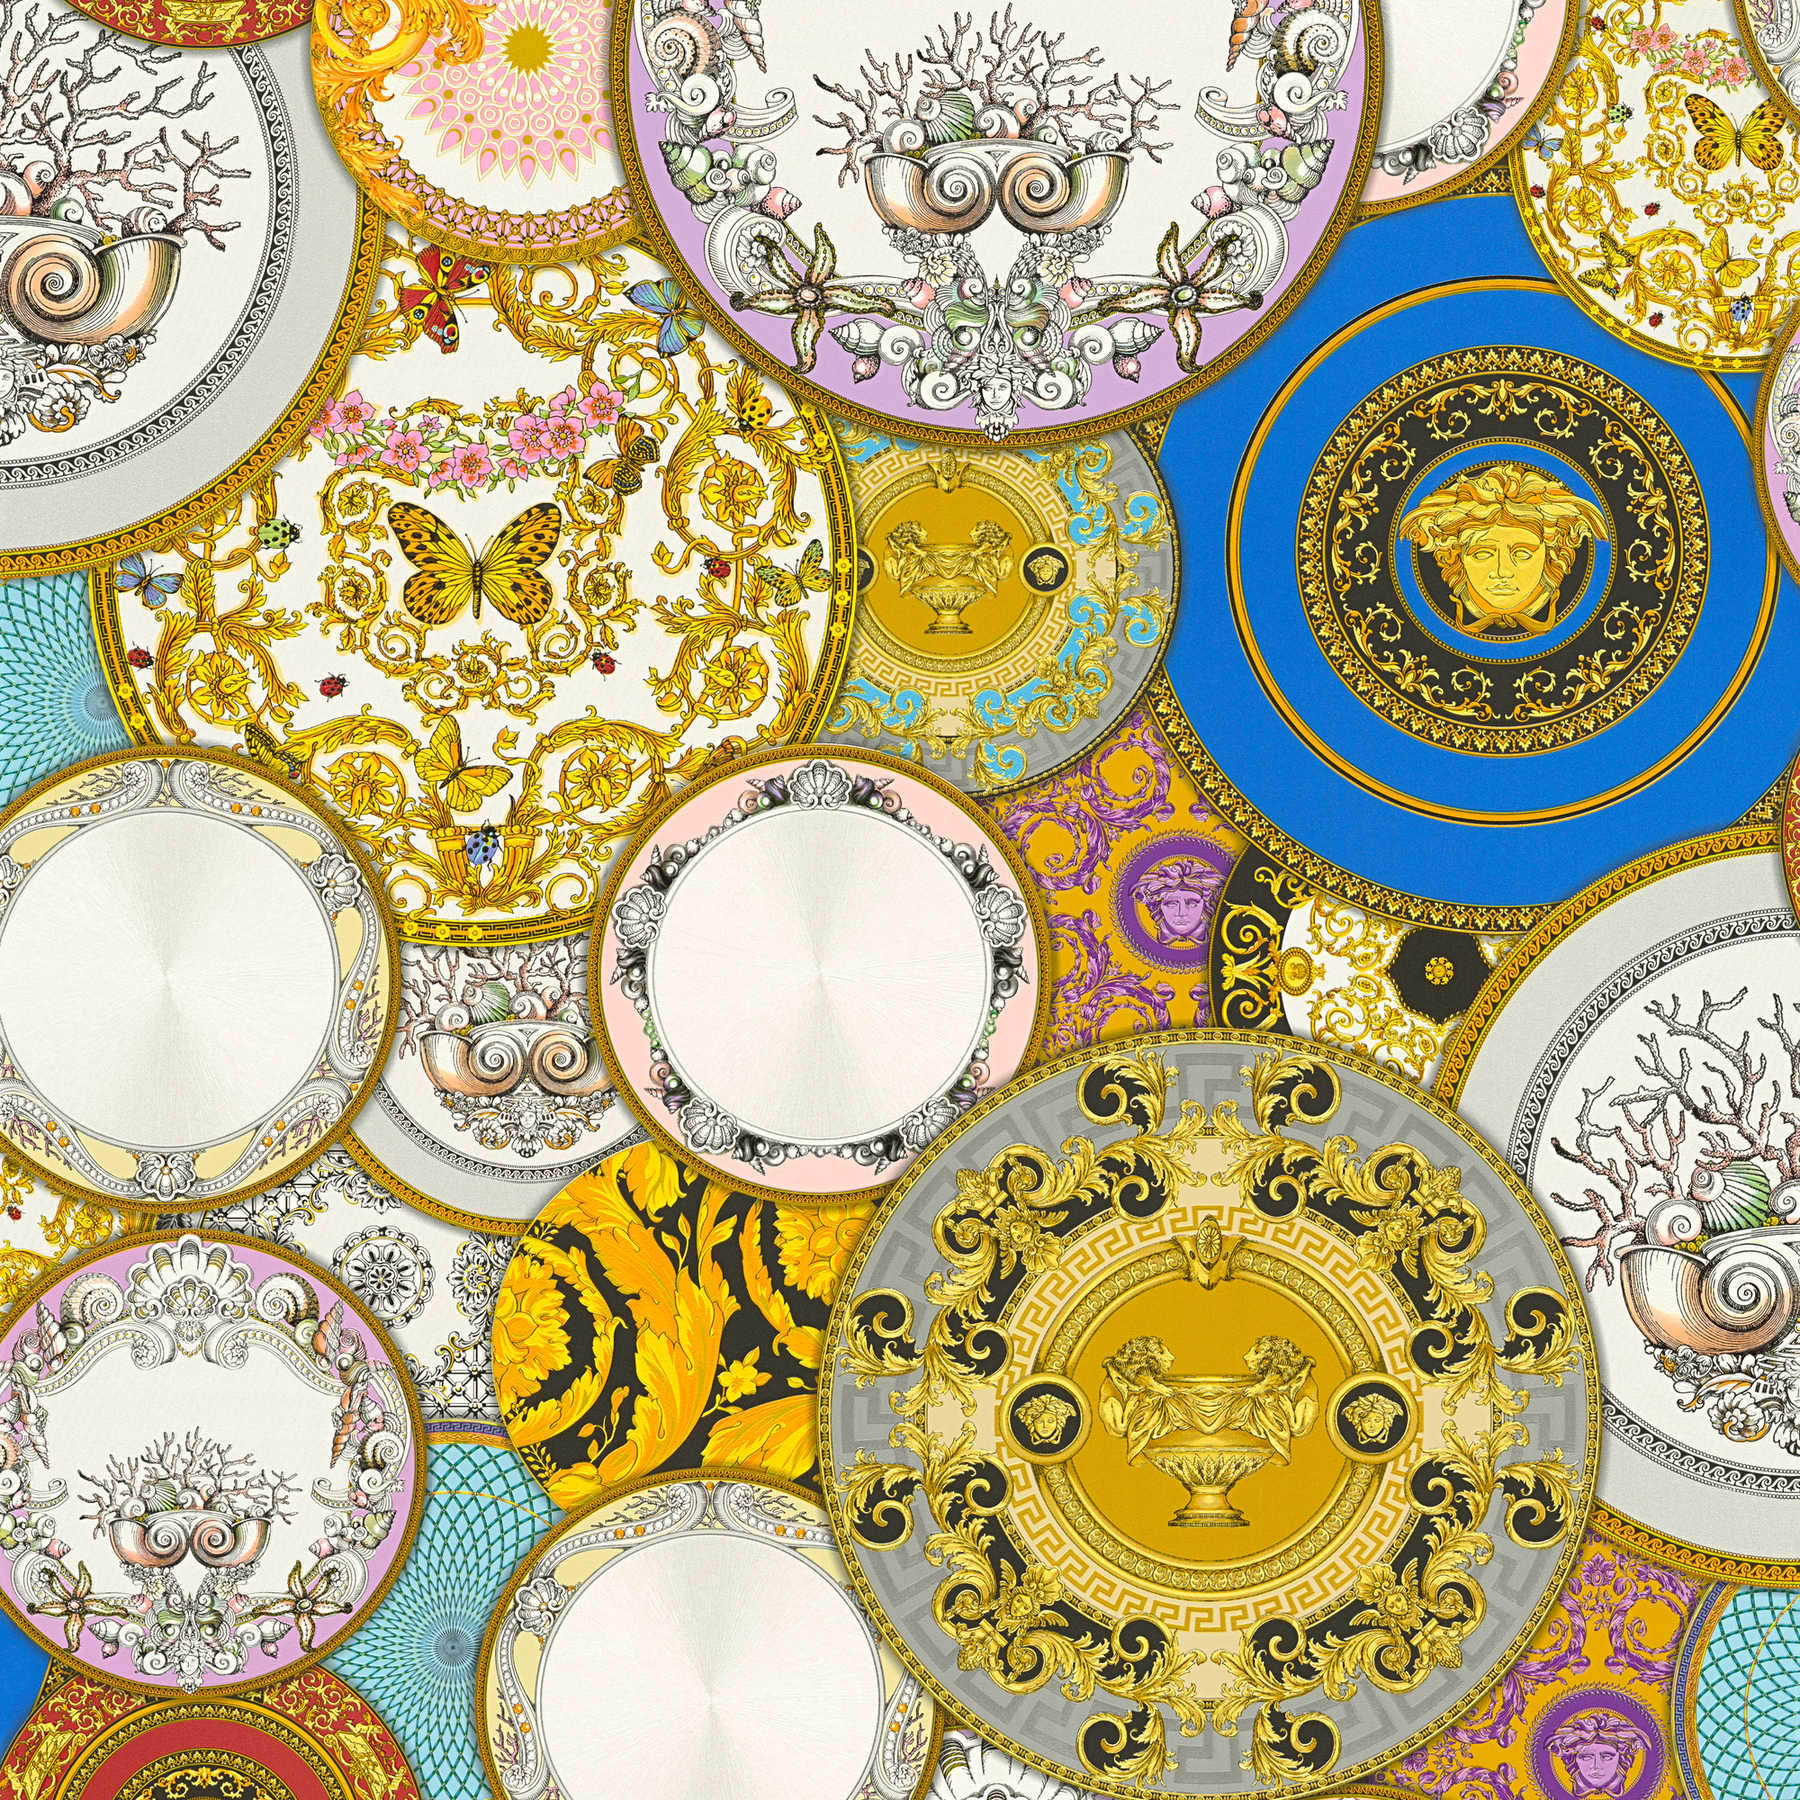         VERSACE wallpaper with medals design & gold effect - Colorful, Metallic
    